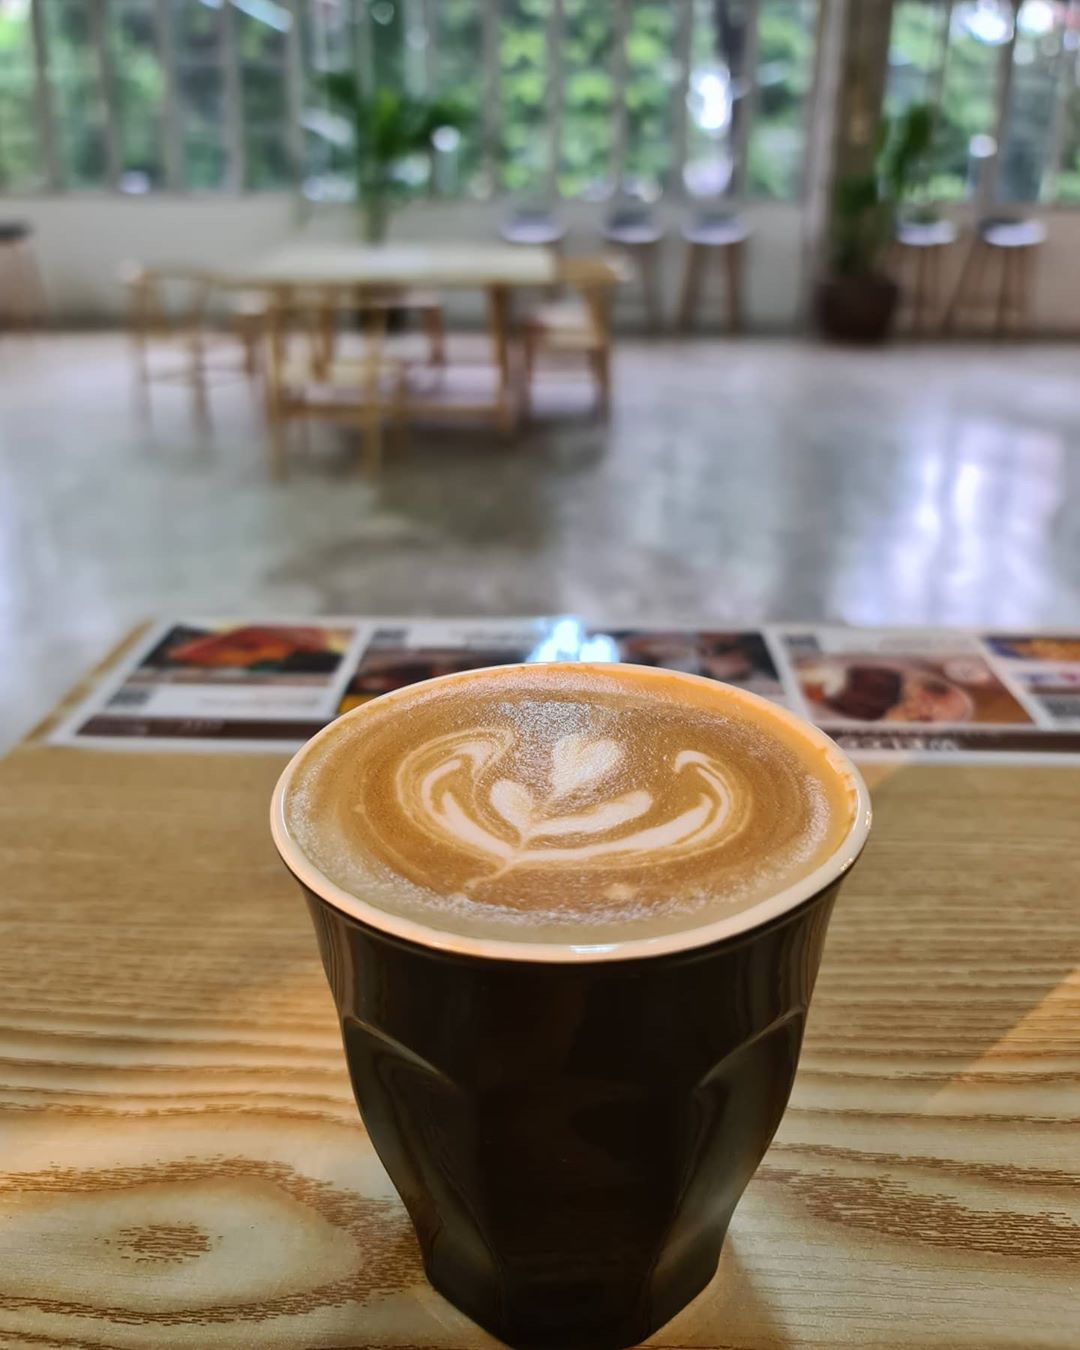 New Cafe August 2020 - PyRoast